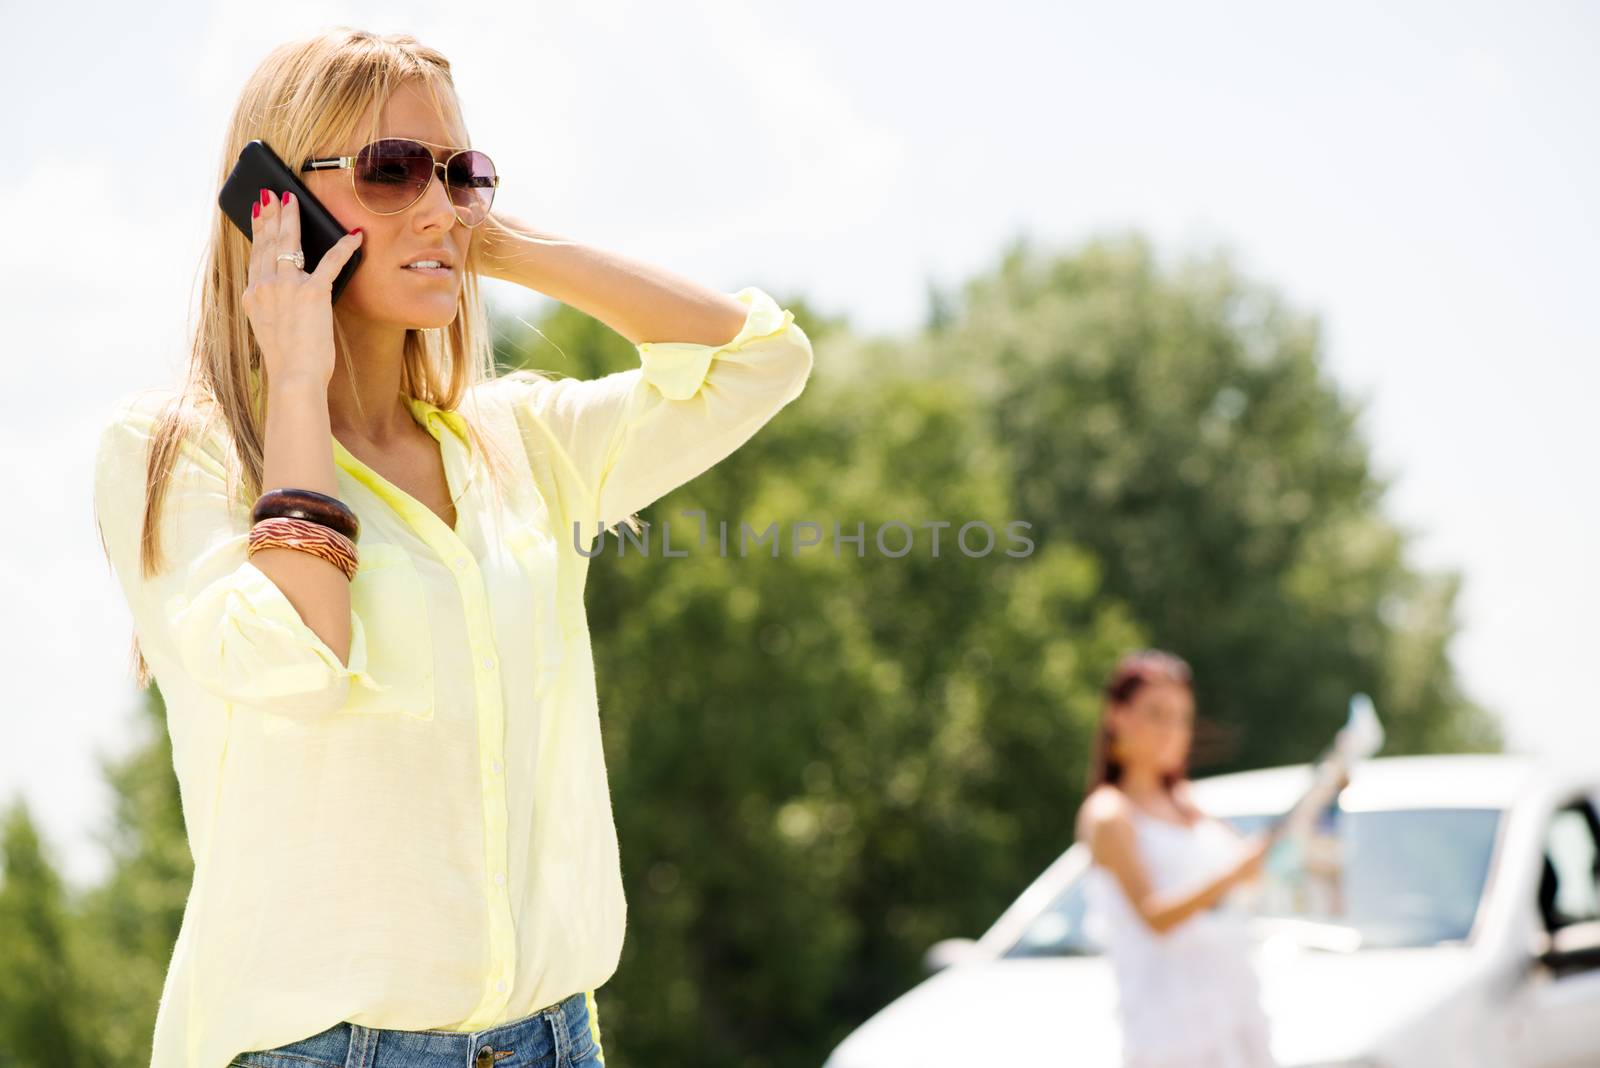 Young Tourist Woman Making Phone Call and asking for direction, because she is lost on the road.